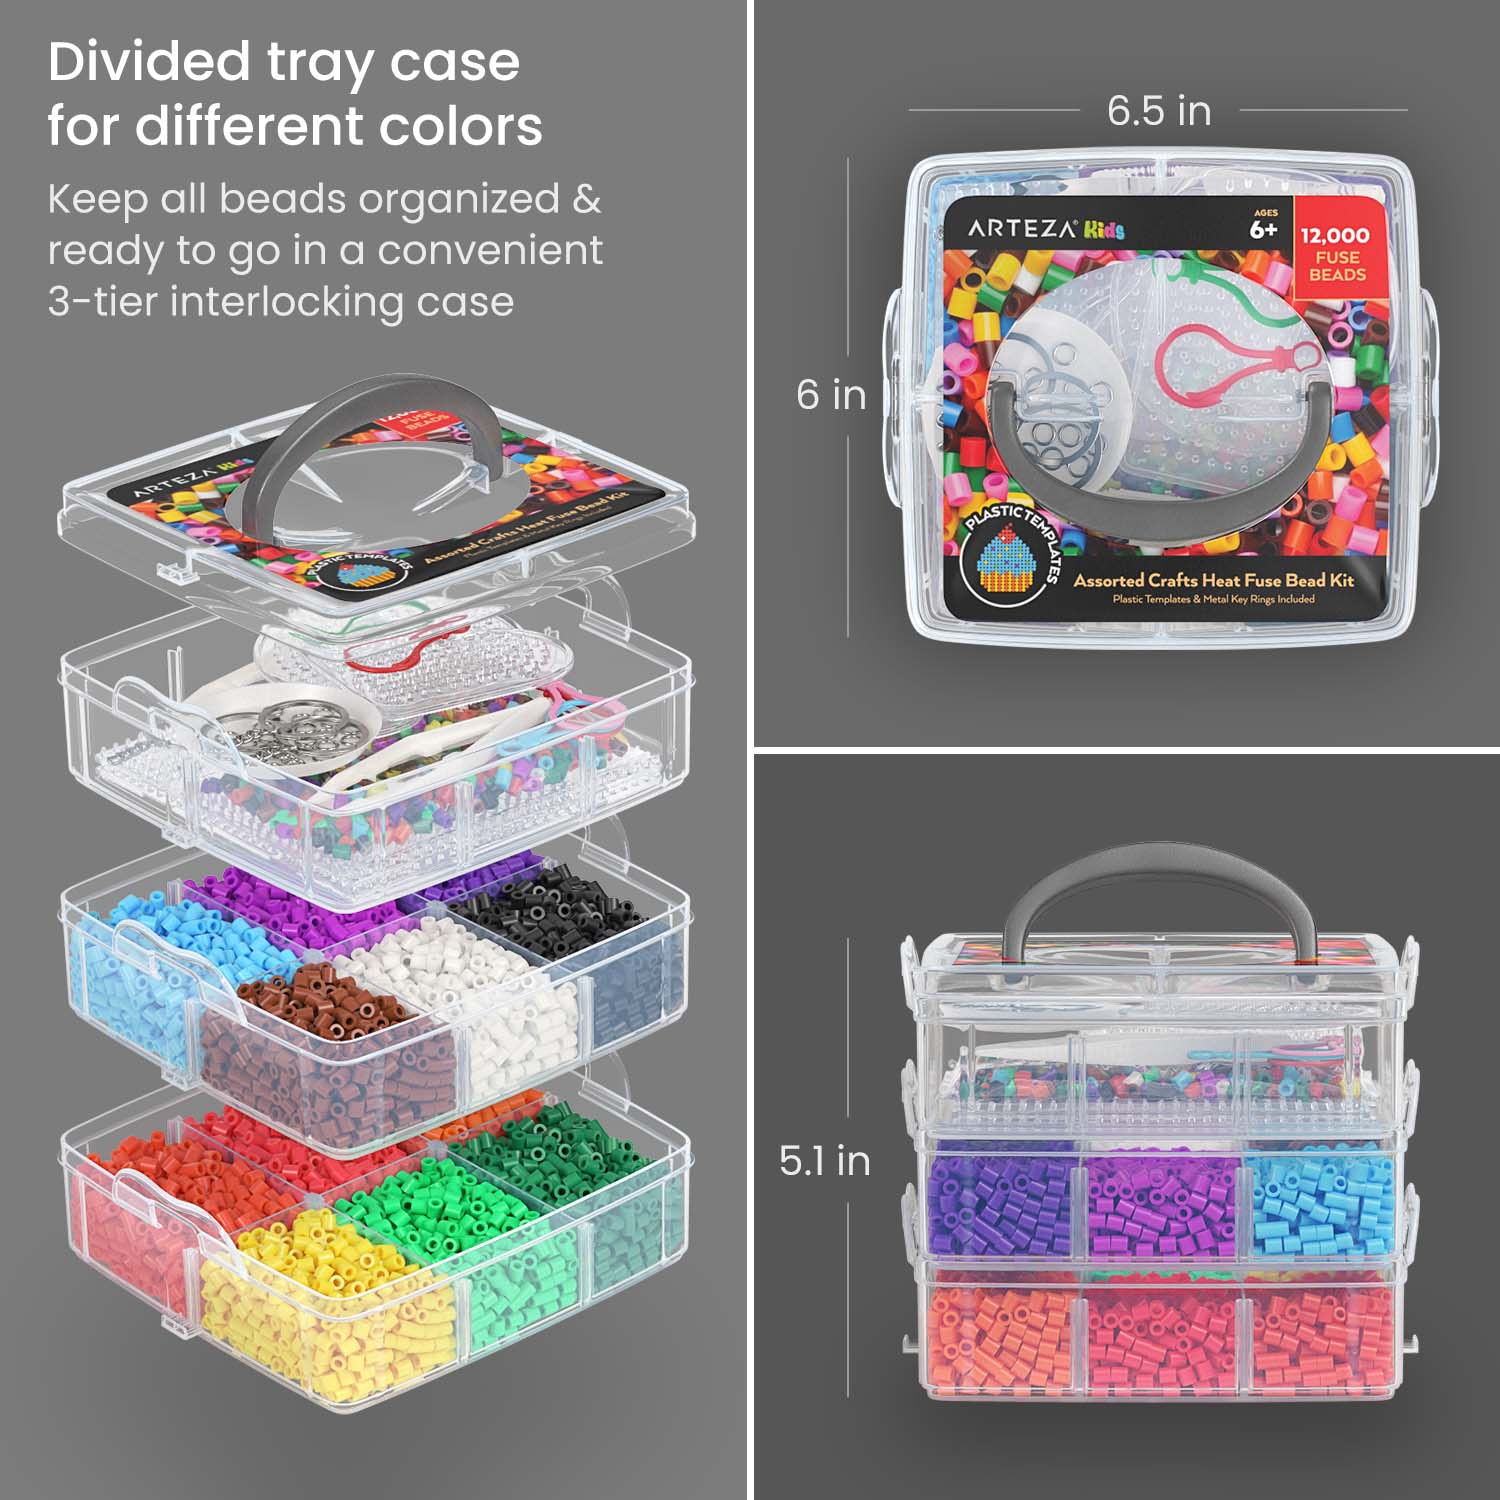 Arteza Kids Heat Fuse Beads, 12,000 Iron Beads, 12 Colors, 35 Assorted Designs, 5 Templates, 10 Key Rings, Kids Activities and Craft Supplies for